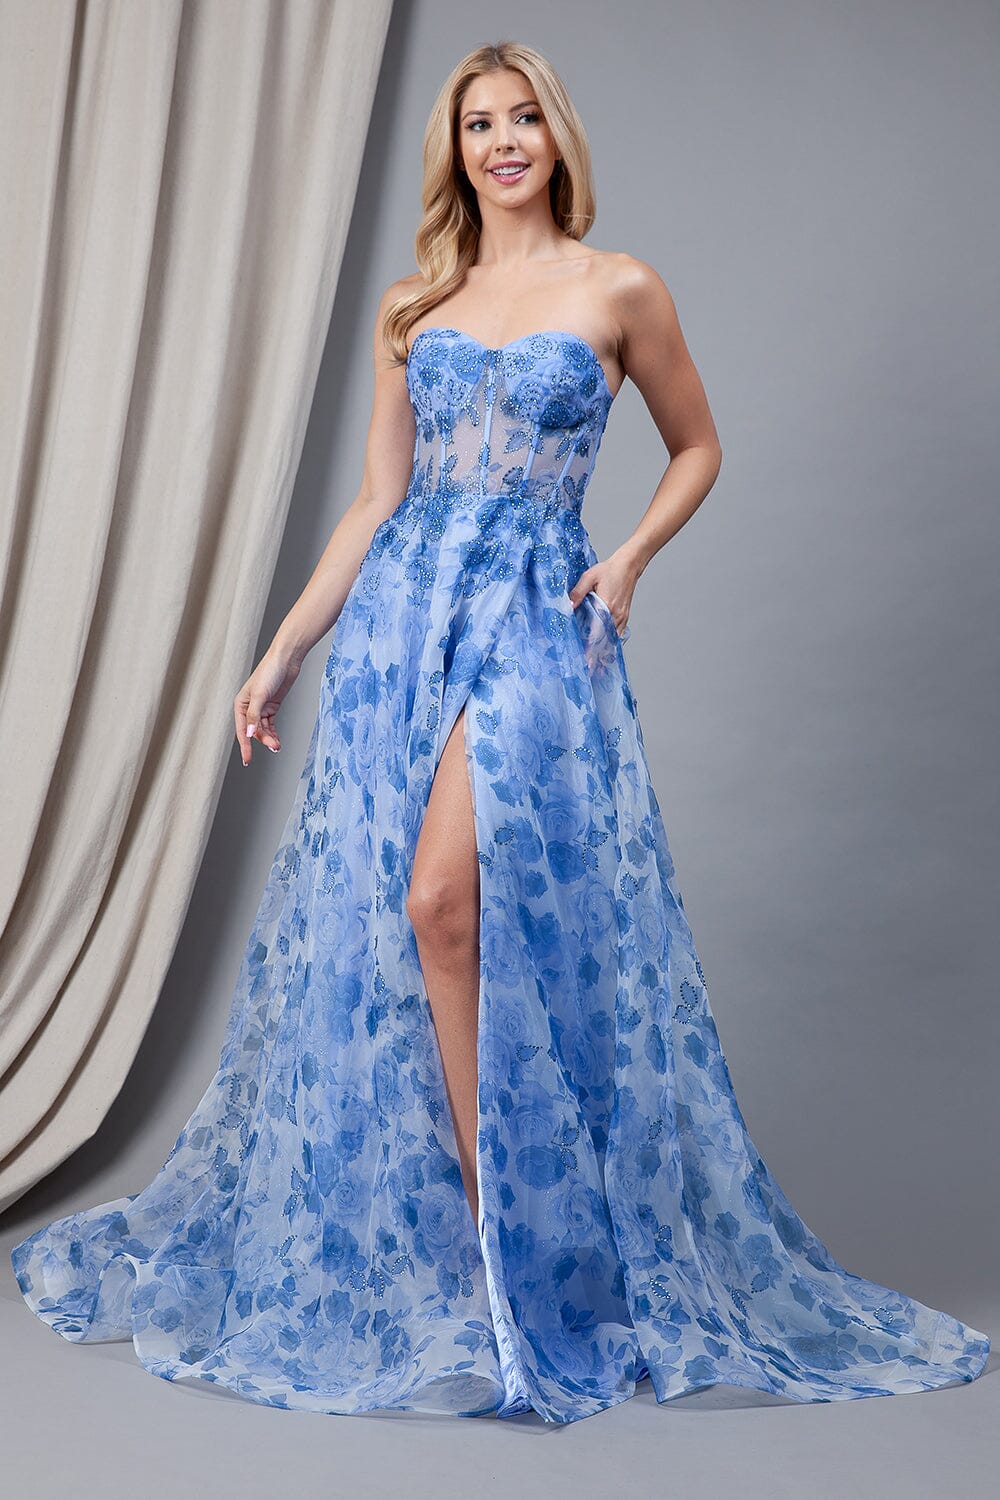 Floral Print Strapless Slit Gown by Amelia Couture 2106